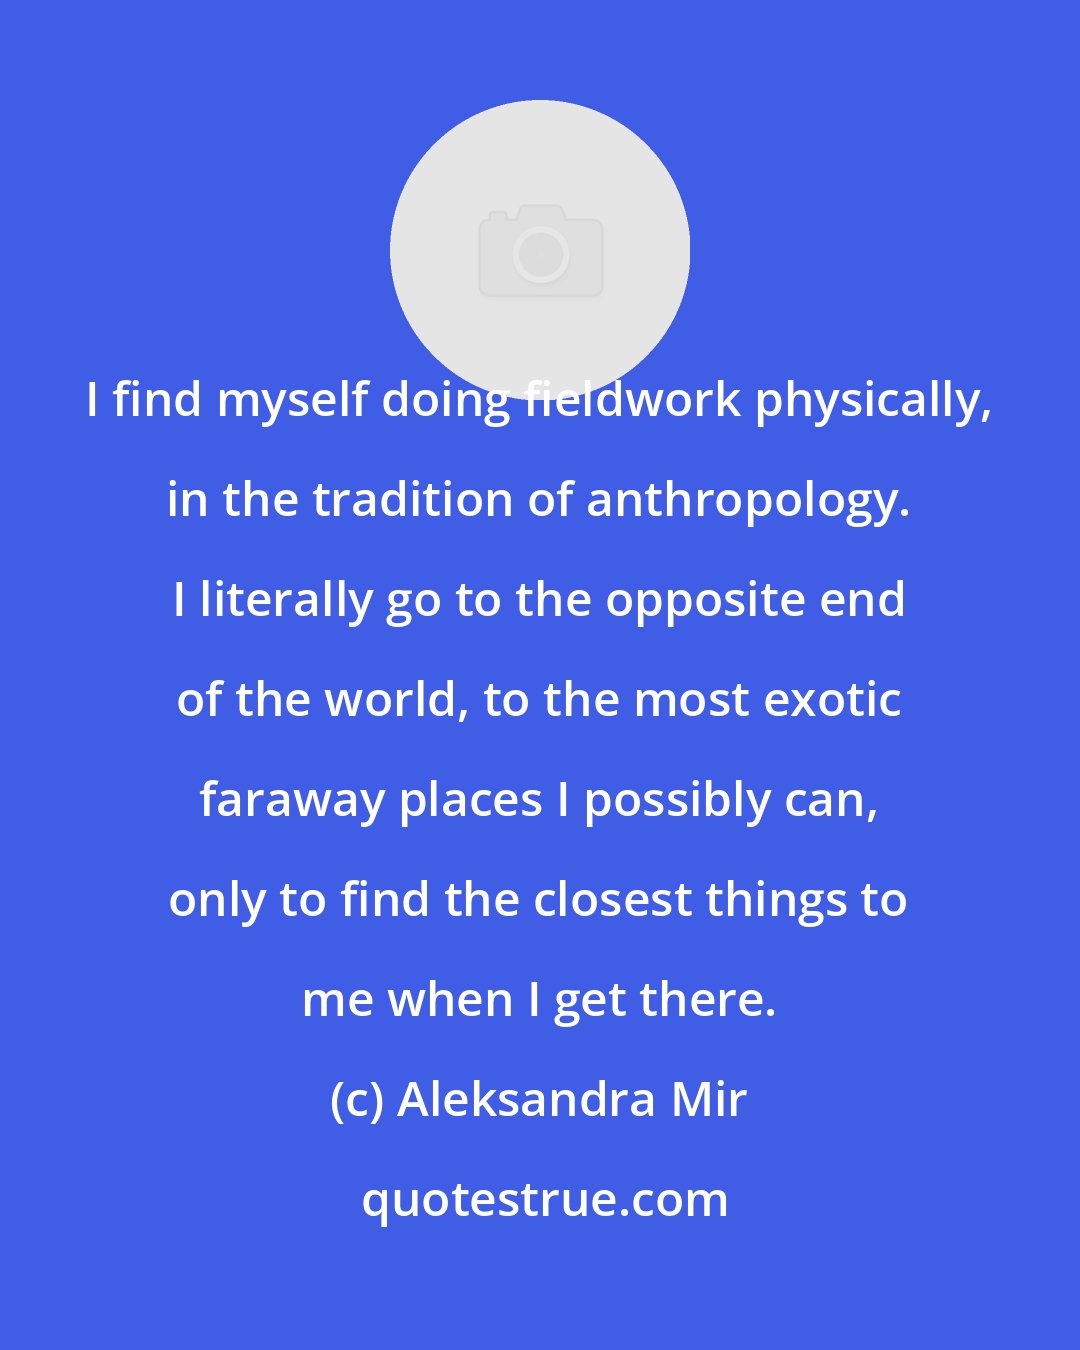 Aleksandra Mir: I find myself doing fieldwork physically, in the tradition of anthropology. I literally go to the opposite end of the world, to the most exotic faraway places I possibly can, only to find the closest things to me when I get there.